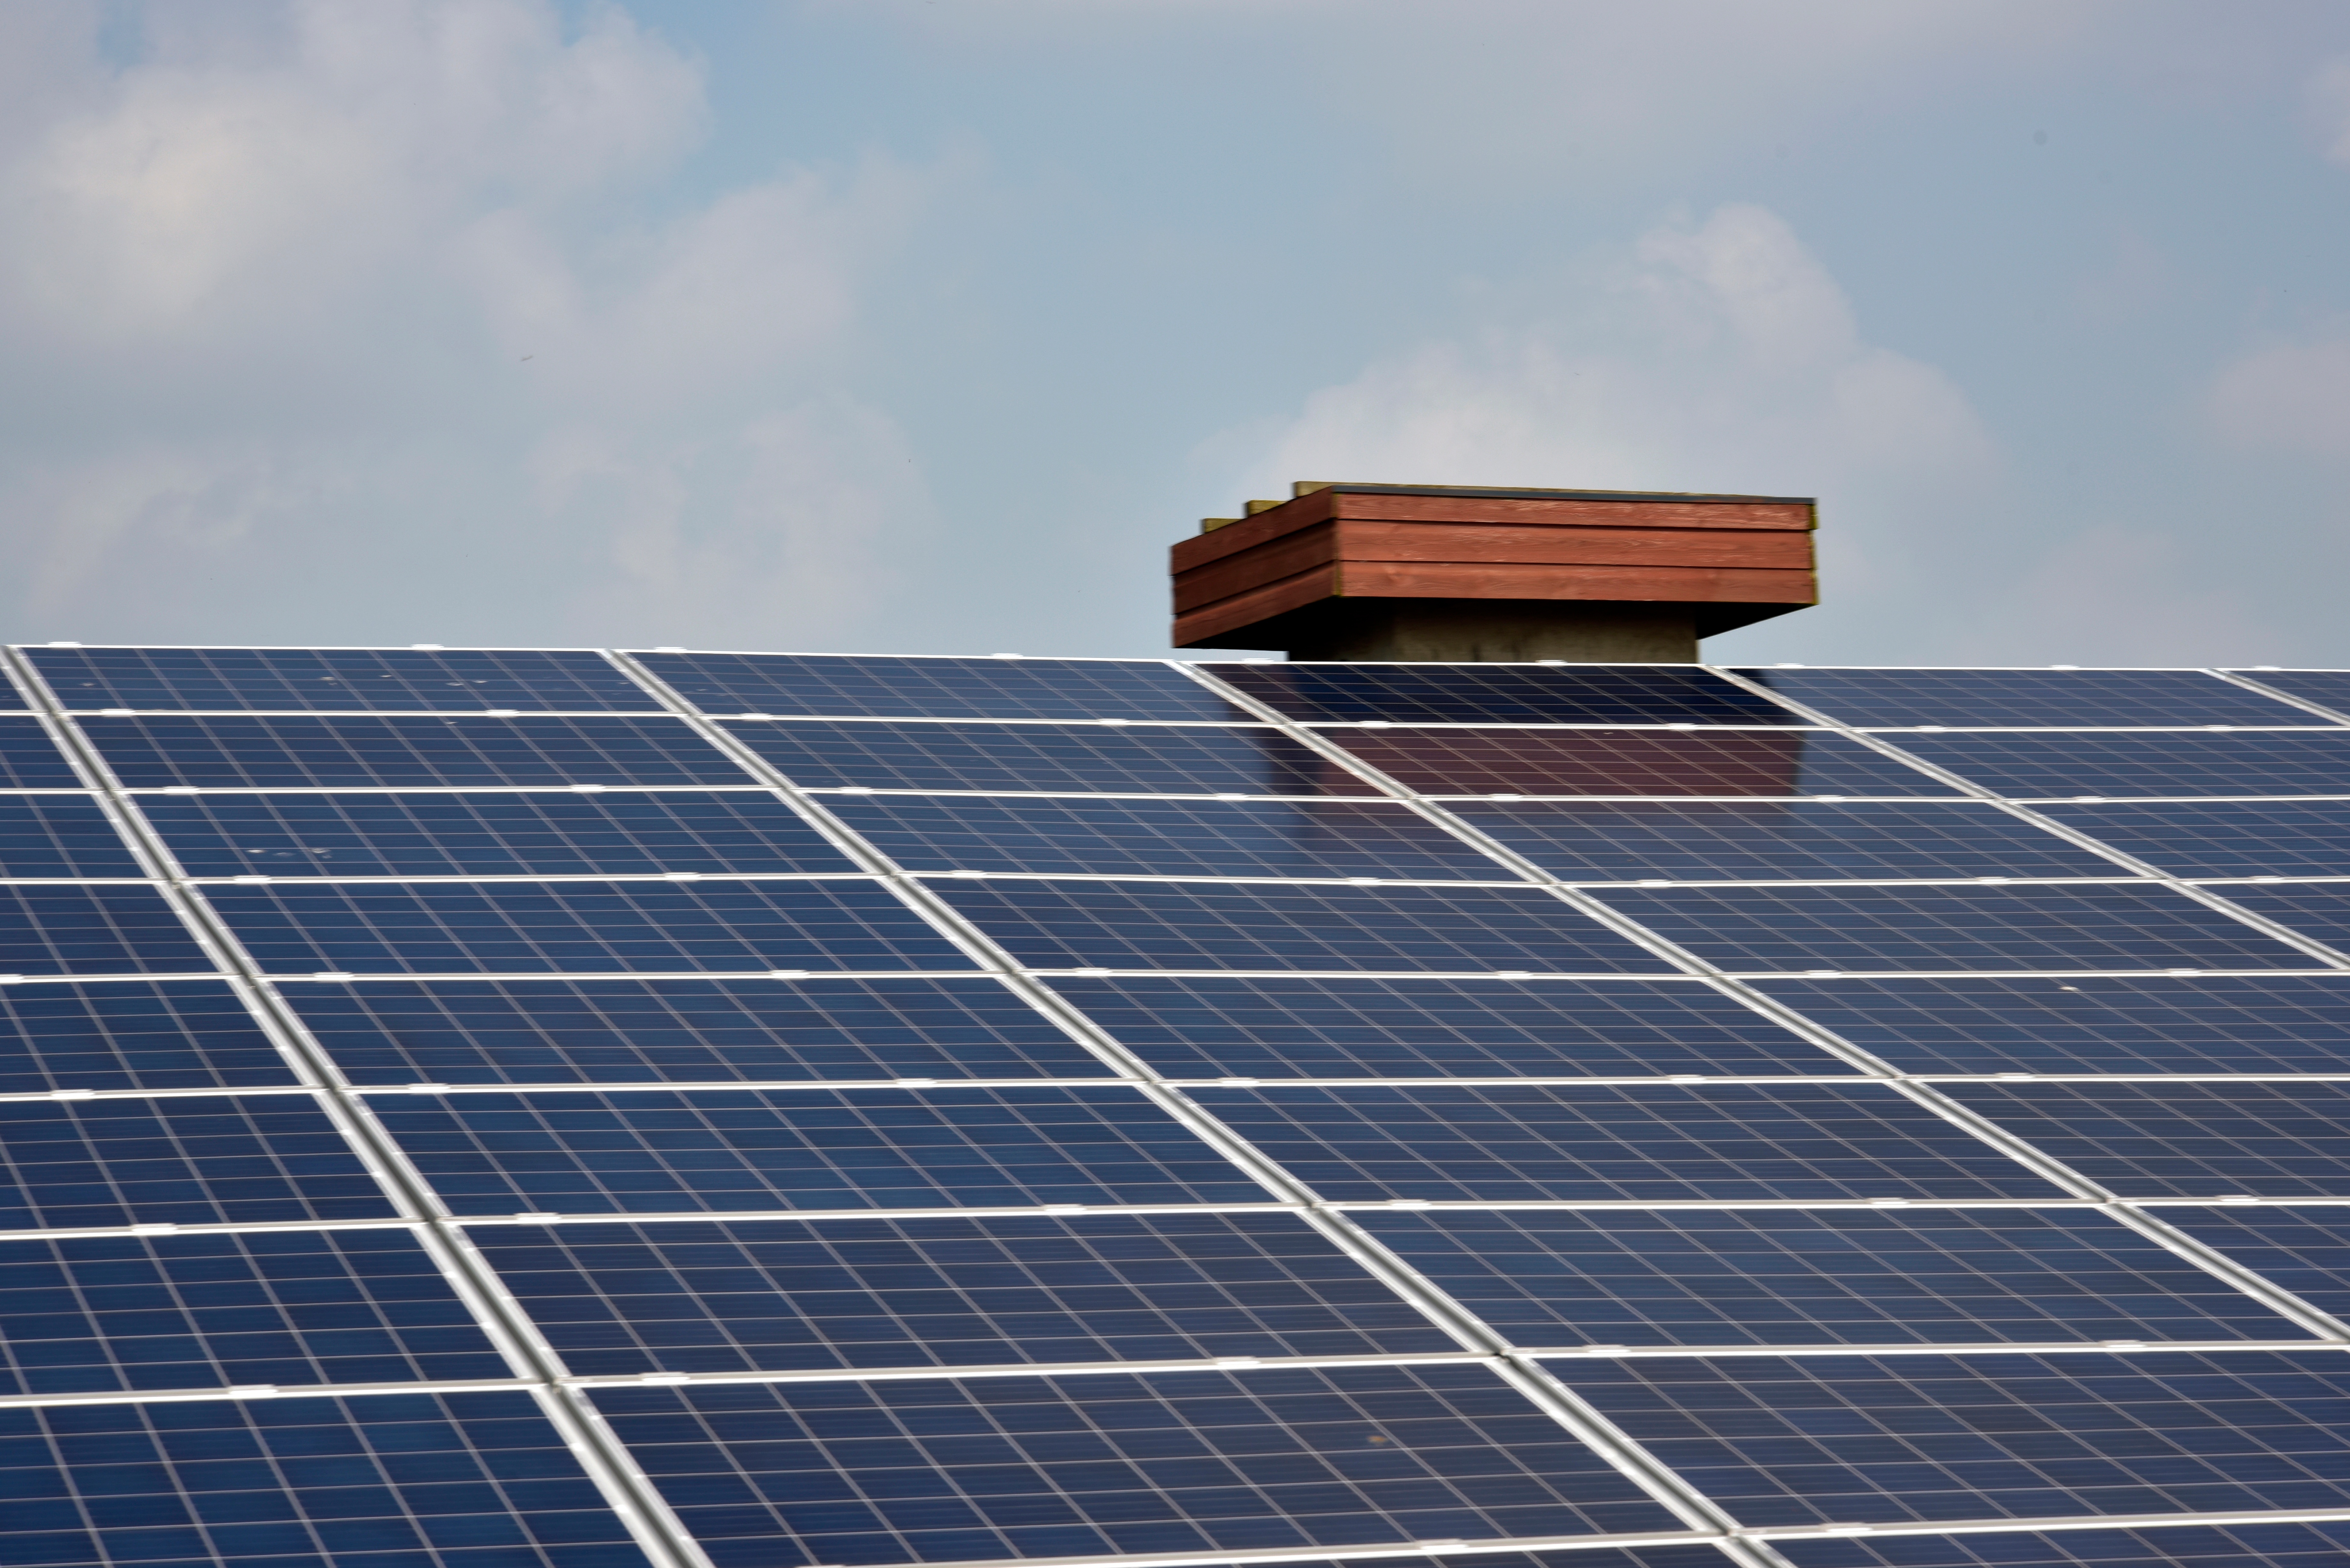 5 reasons managing directors need to invest in solar for business now